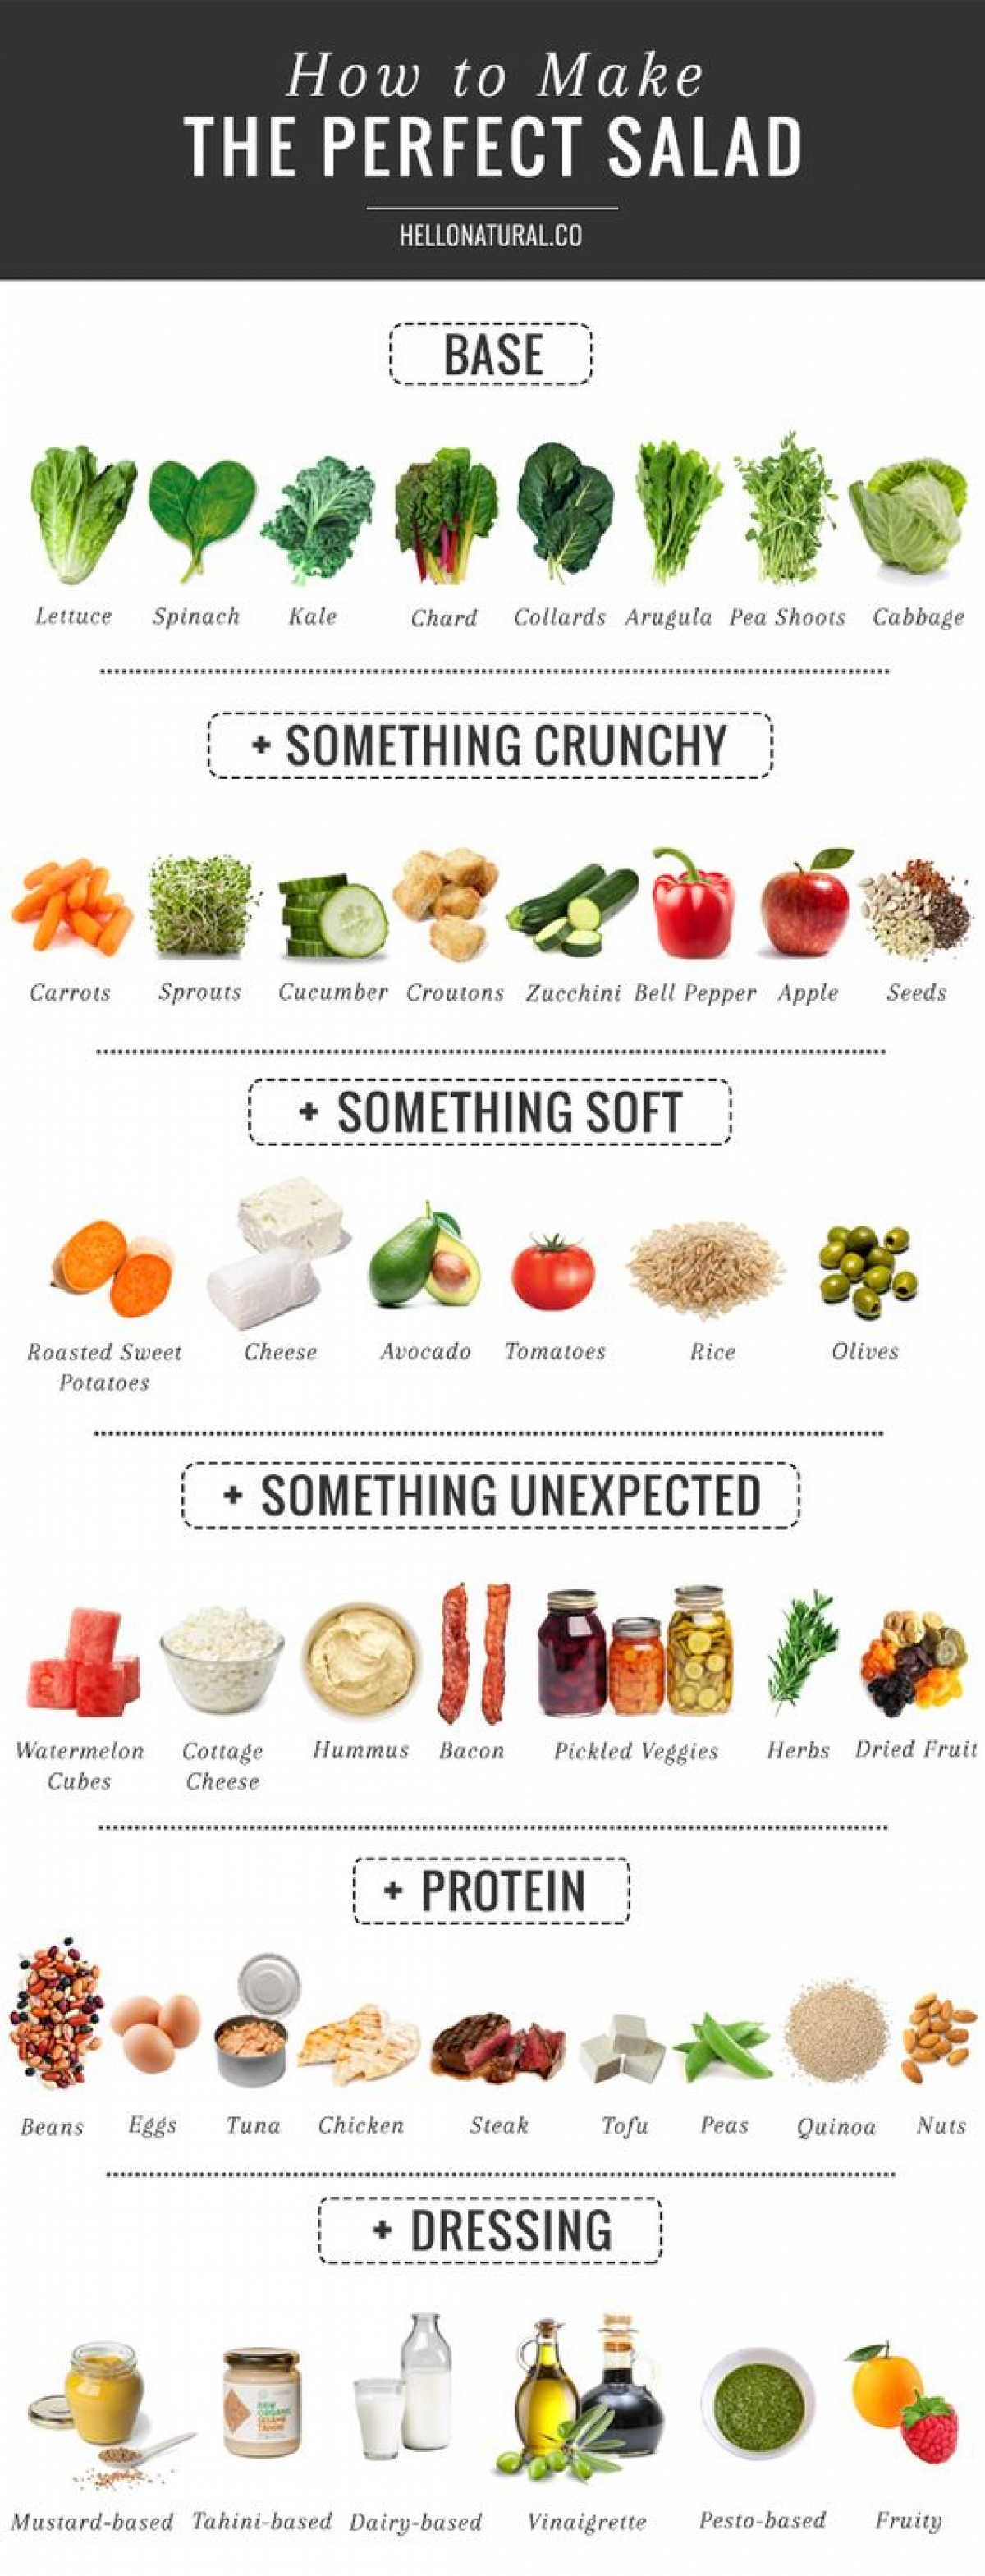 How to make the perfect salad - Infographic